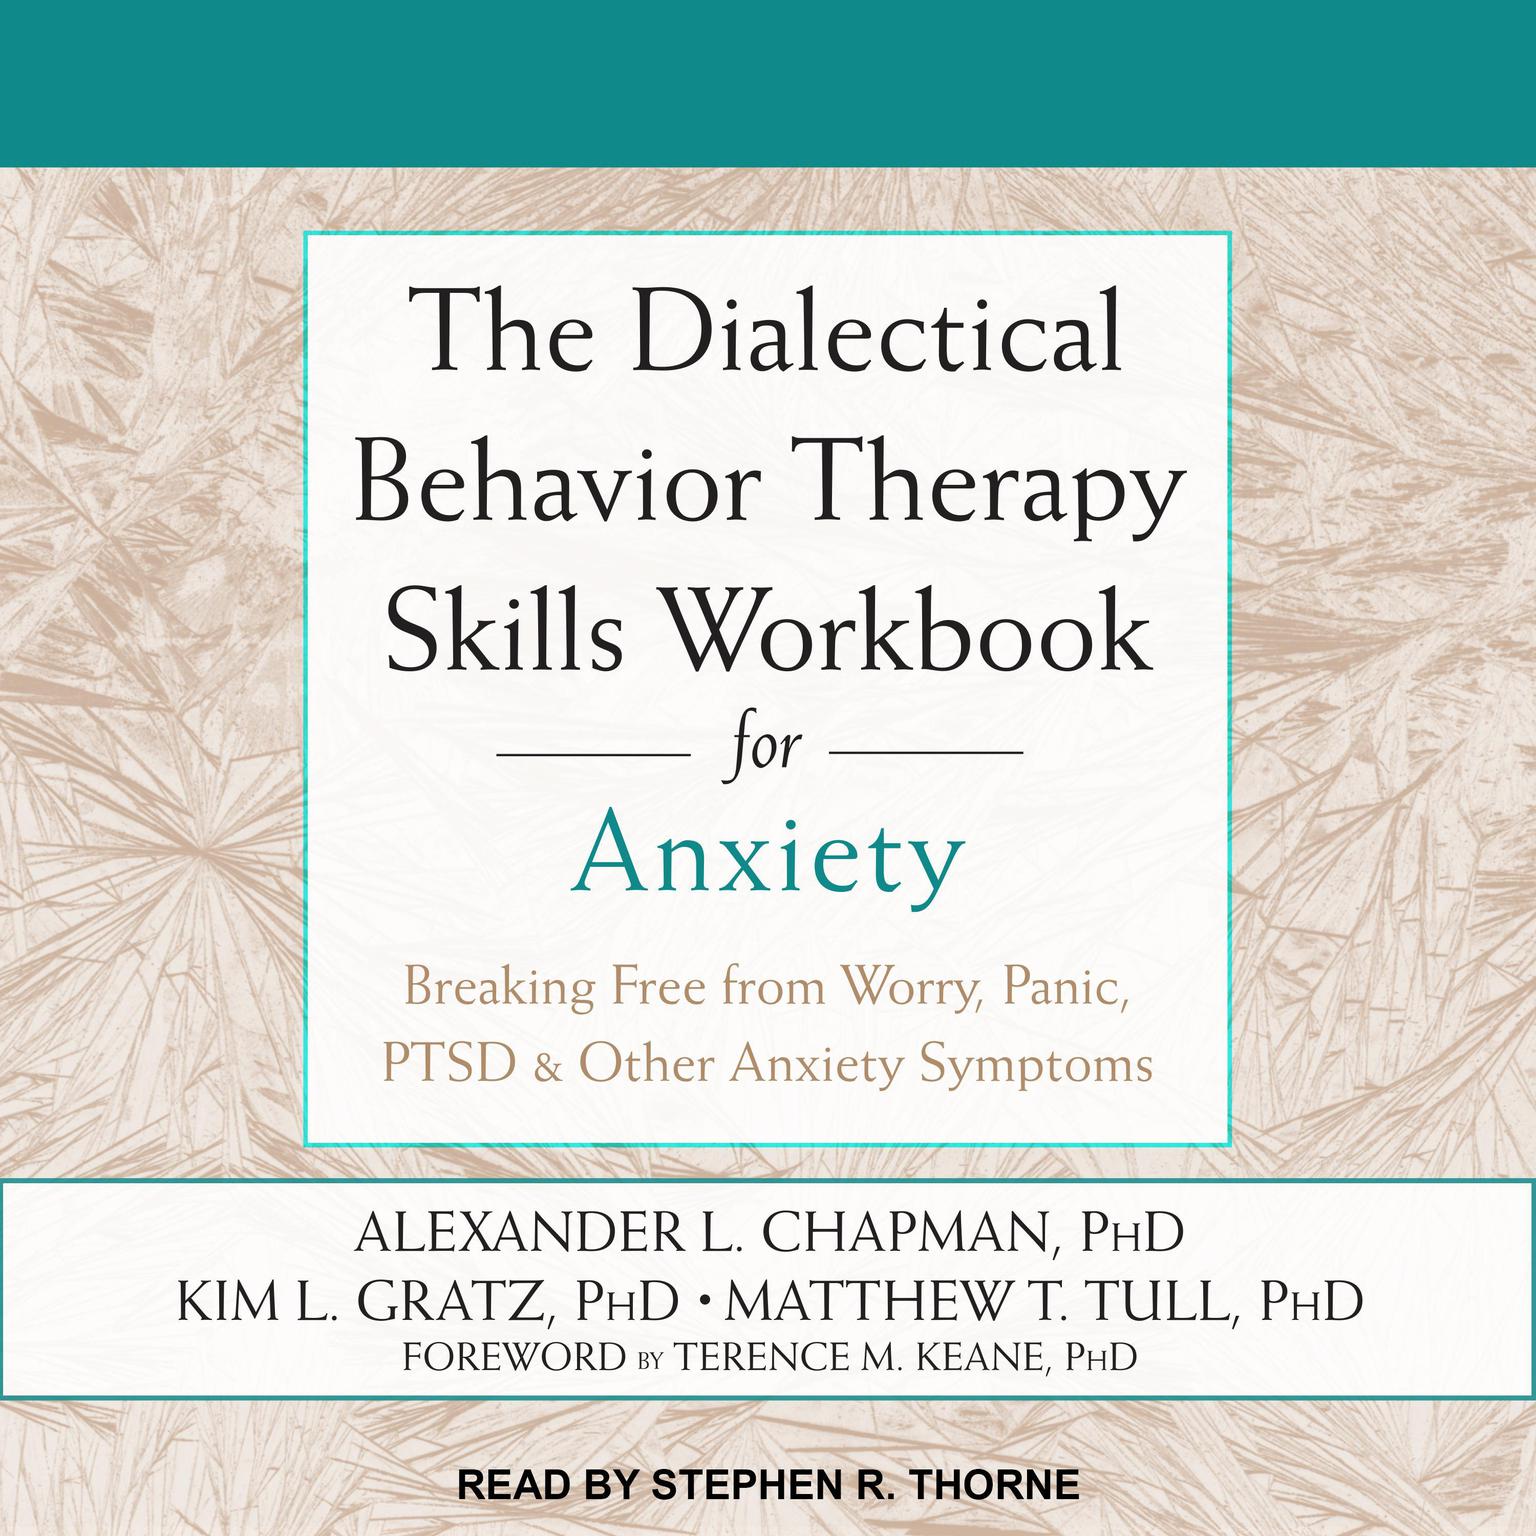 The Dialectical Behavior Therapy Skills Workbook for Anxiety: Breaking Free from Worry, Panic, PTSD & Other Anxiety Symptoms Audiobook, by Alexander L. Chapman, PhD, Rpysch